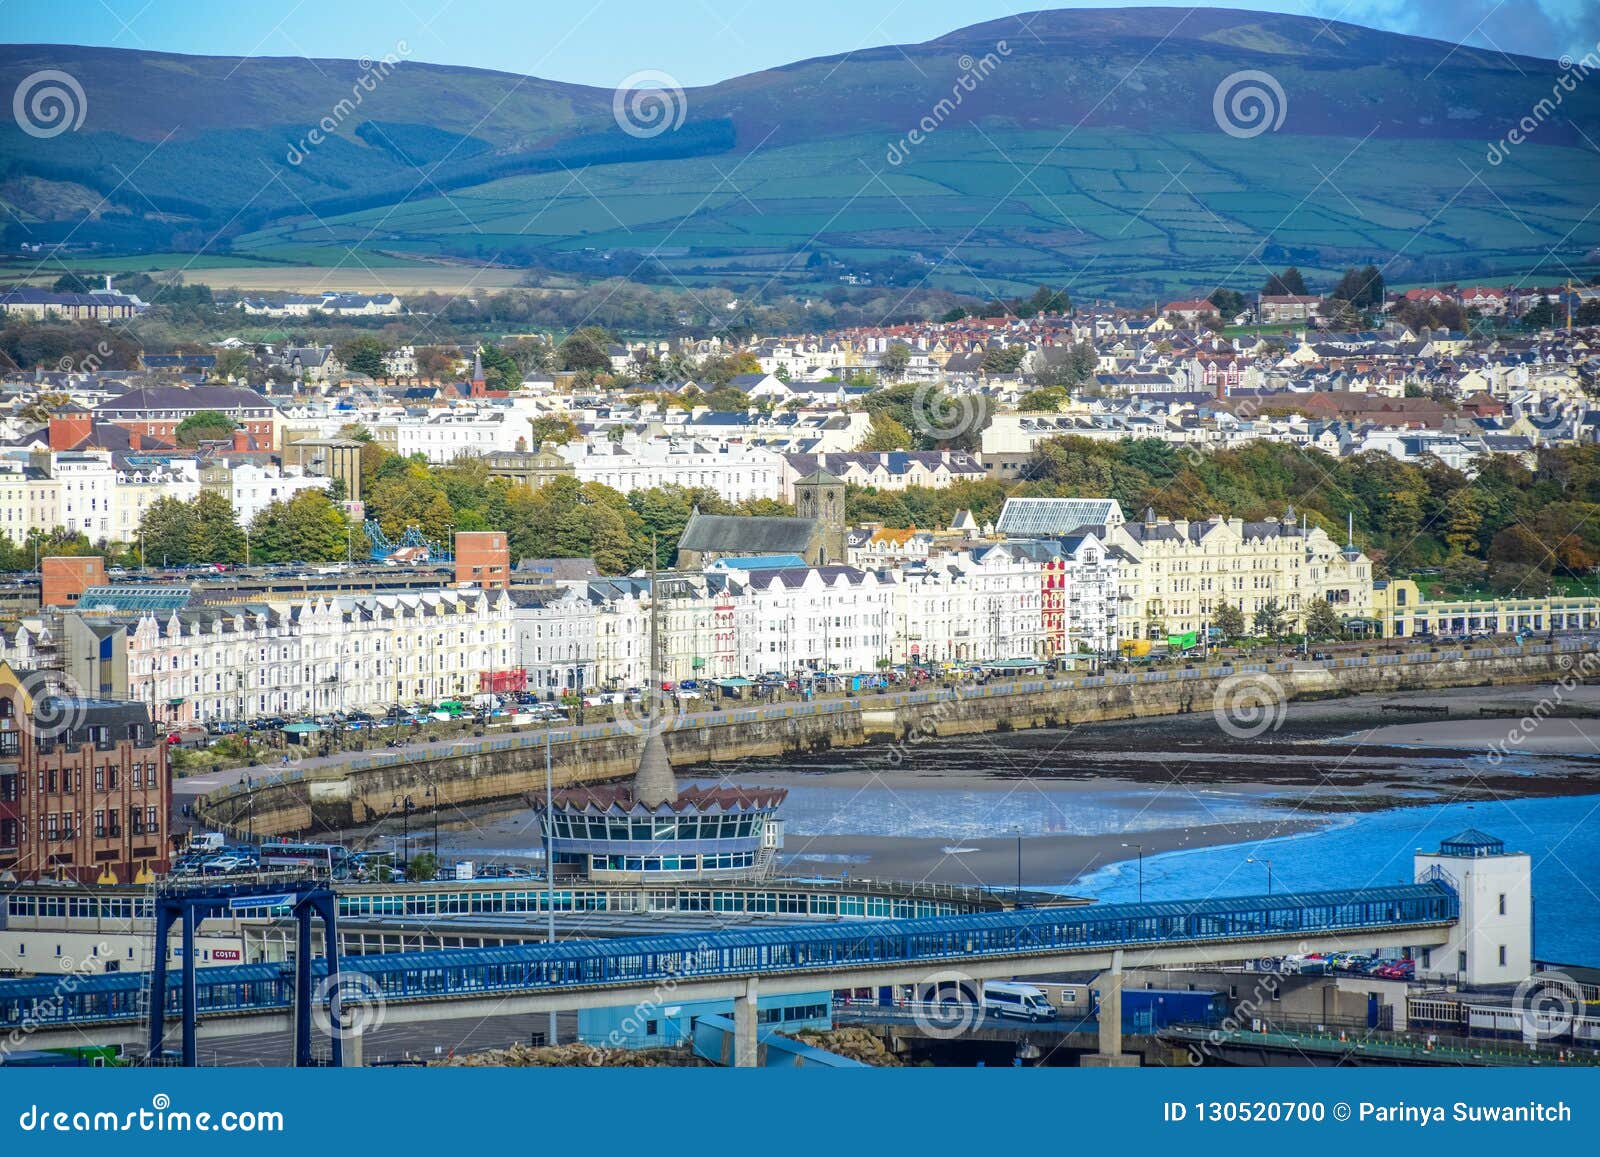 Beautiful Landscape of Town of Douglas in the Isle of Man Image - Image of beachfront, isle: 130520700